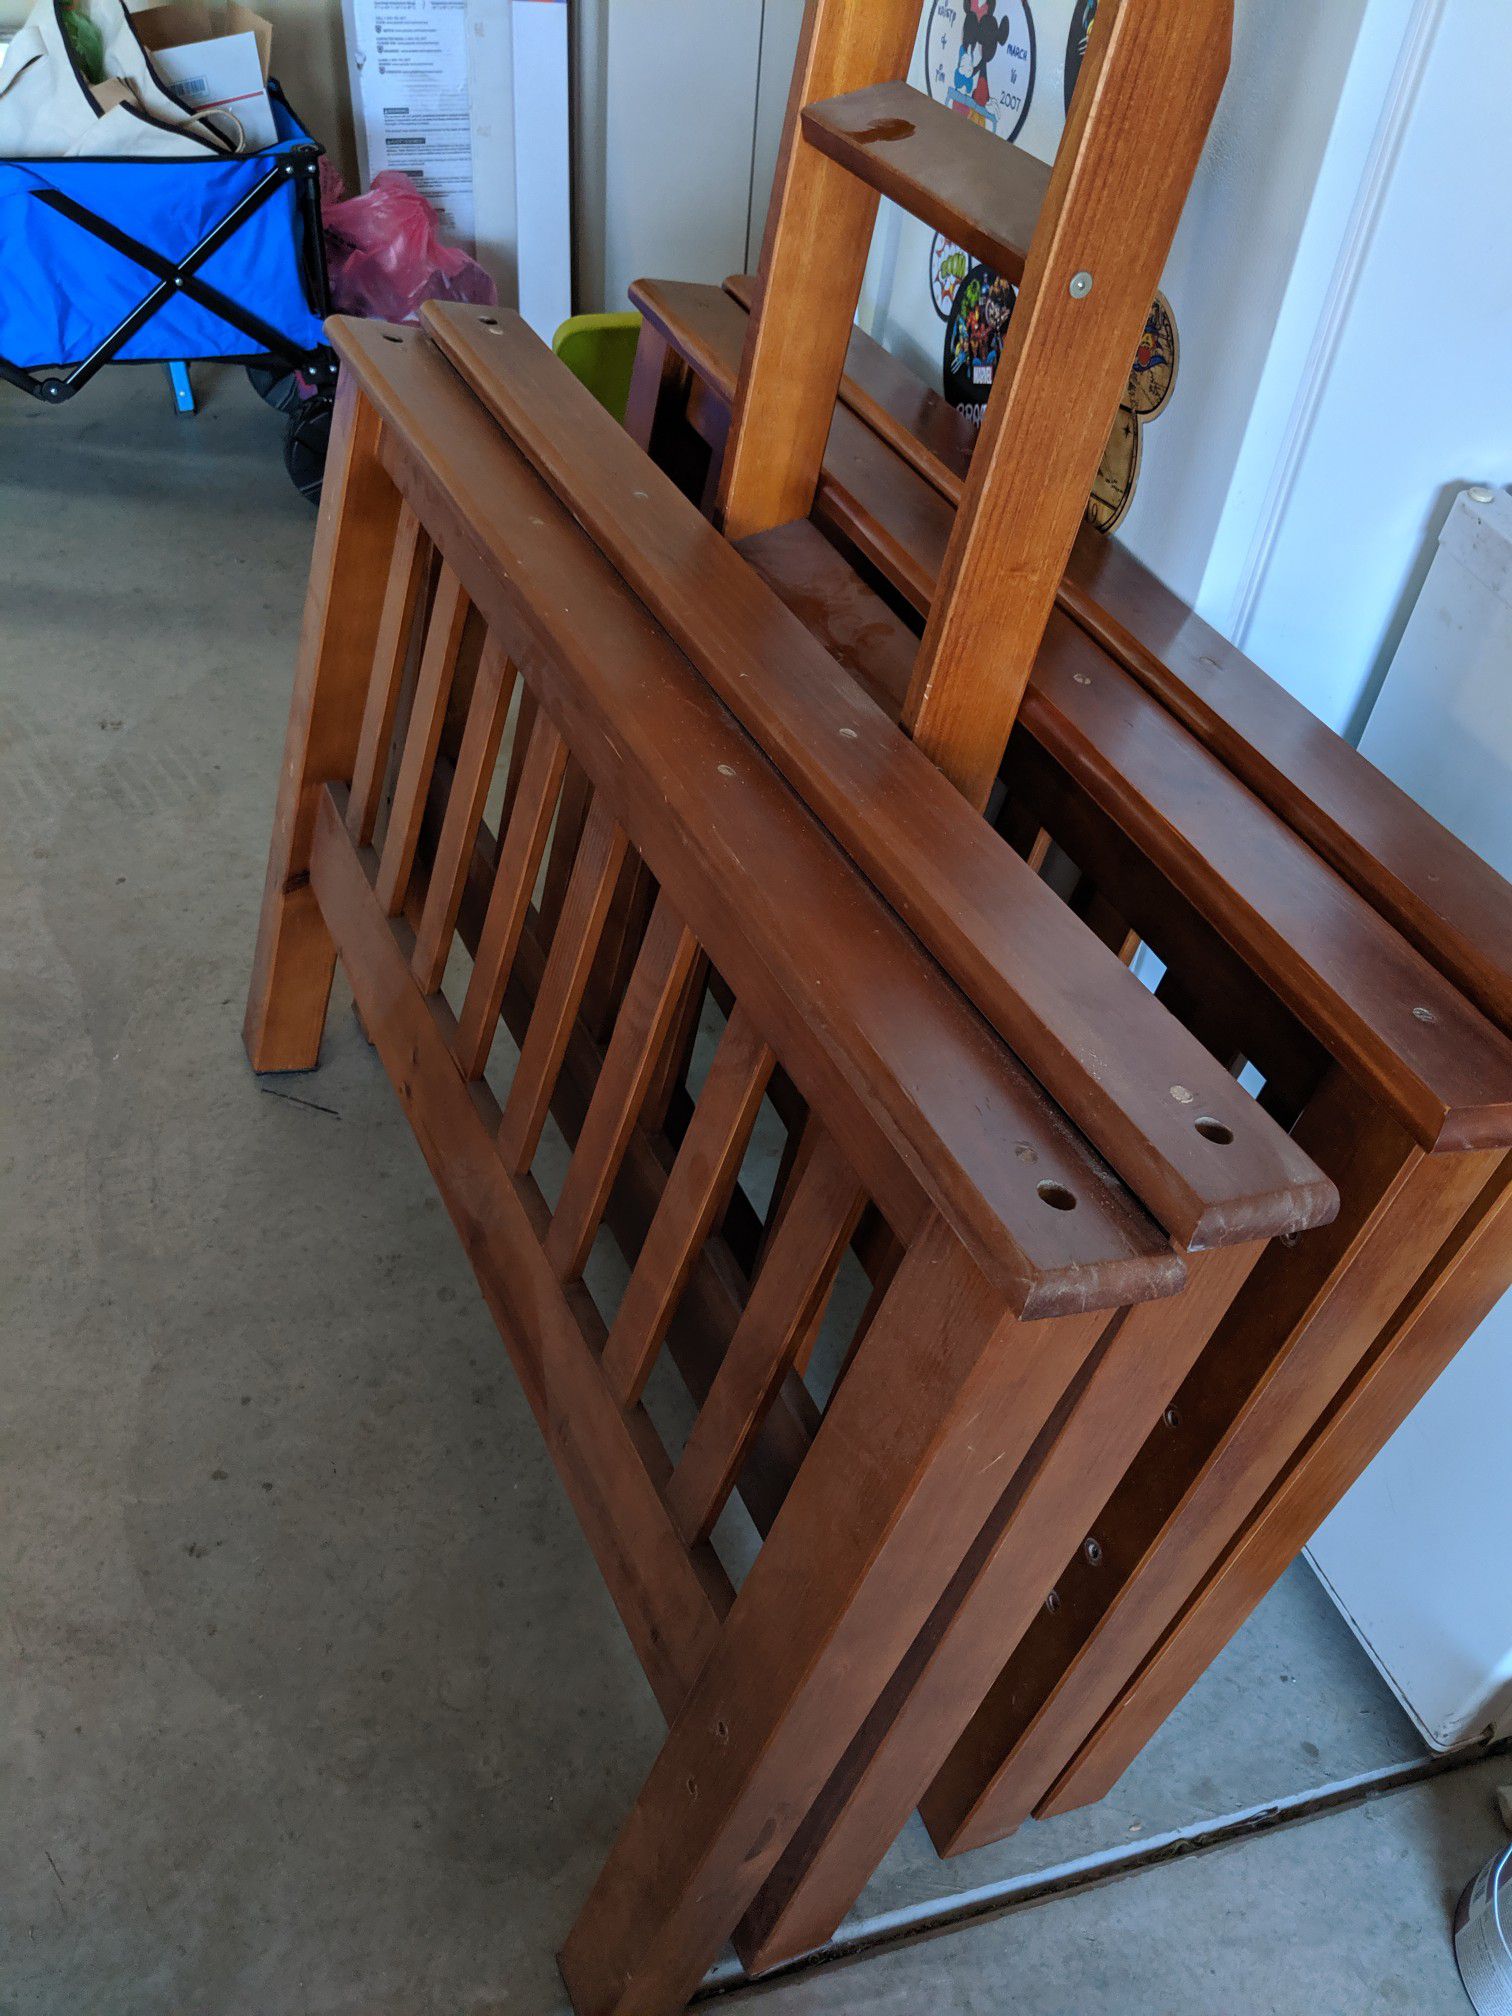 Twin bunk beds with a twin trundle bed. Good condition, top railing has some wear.